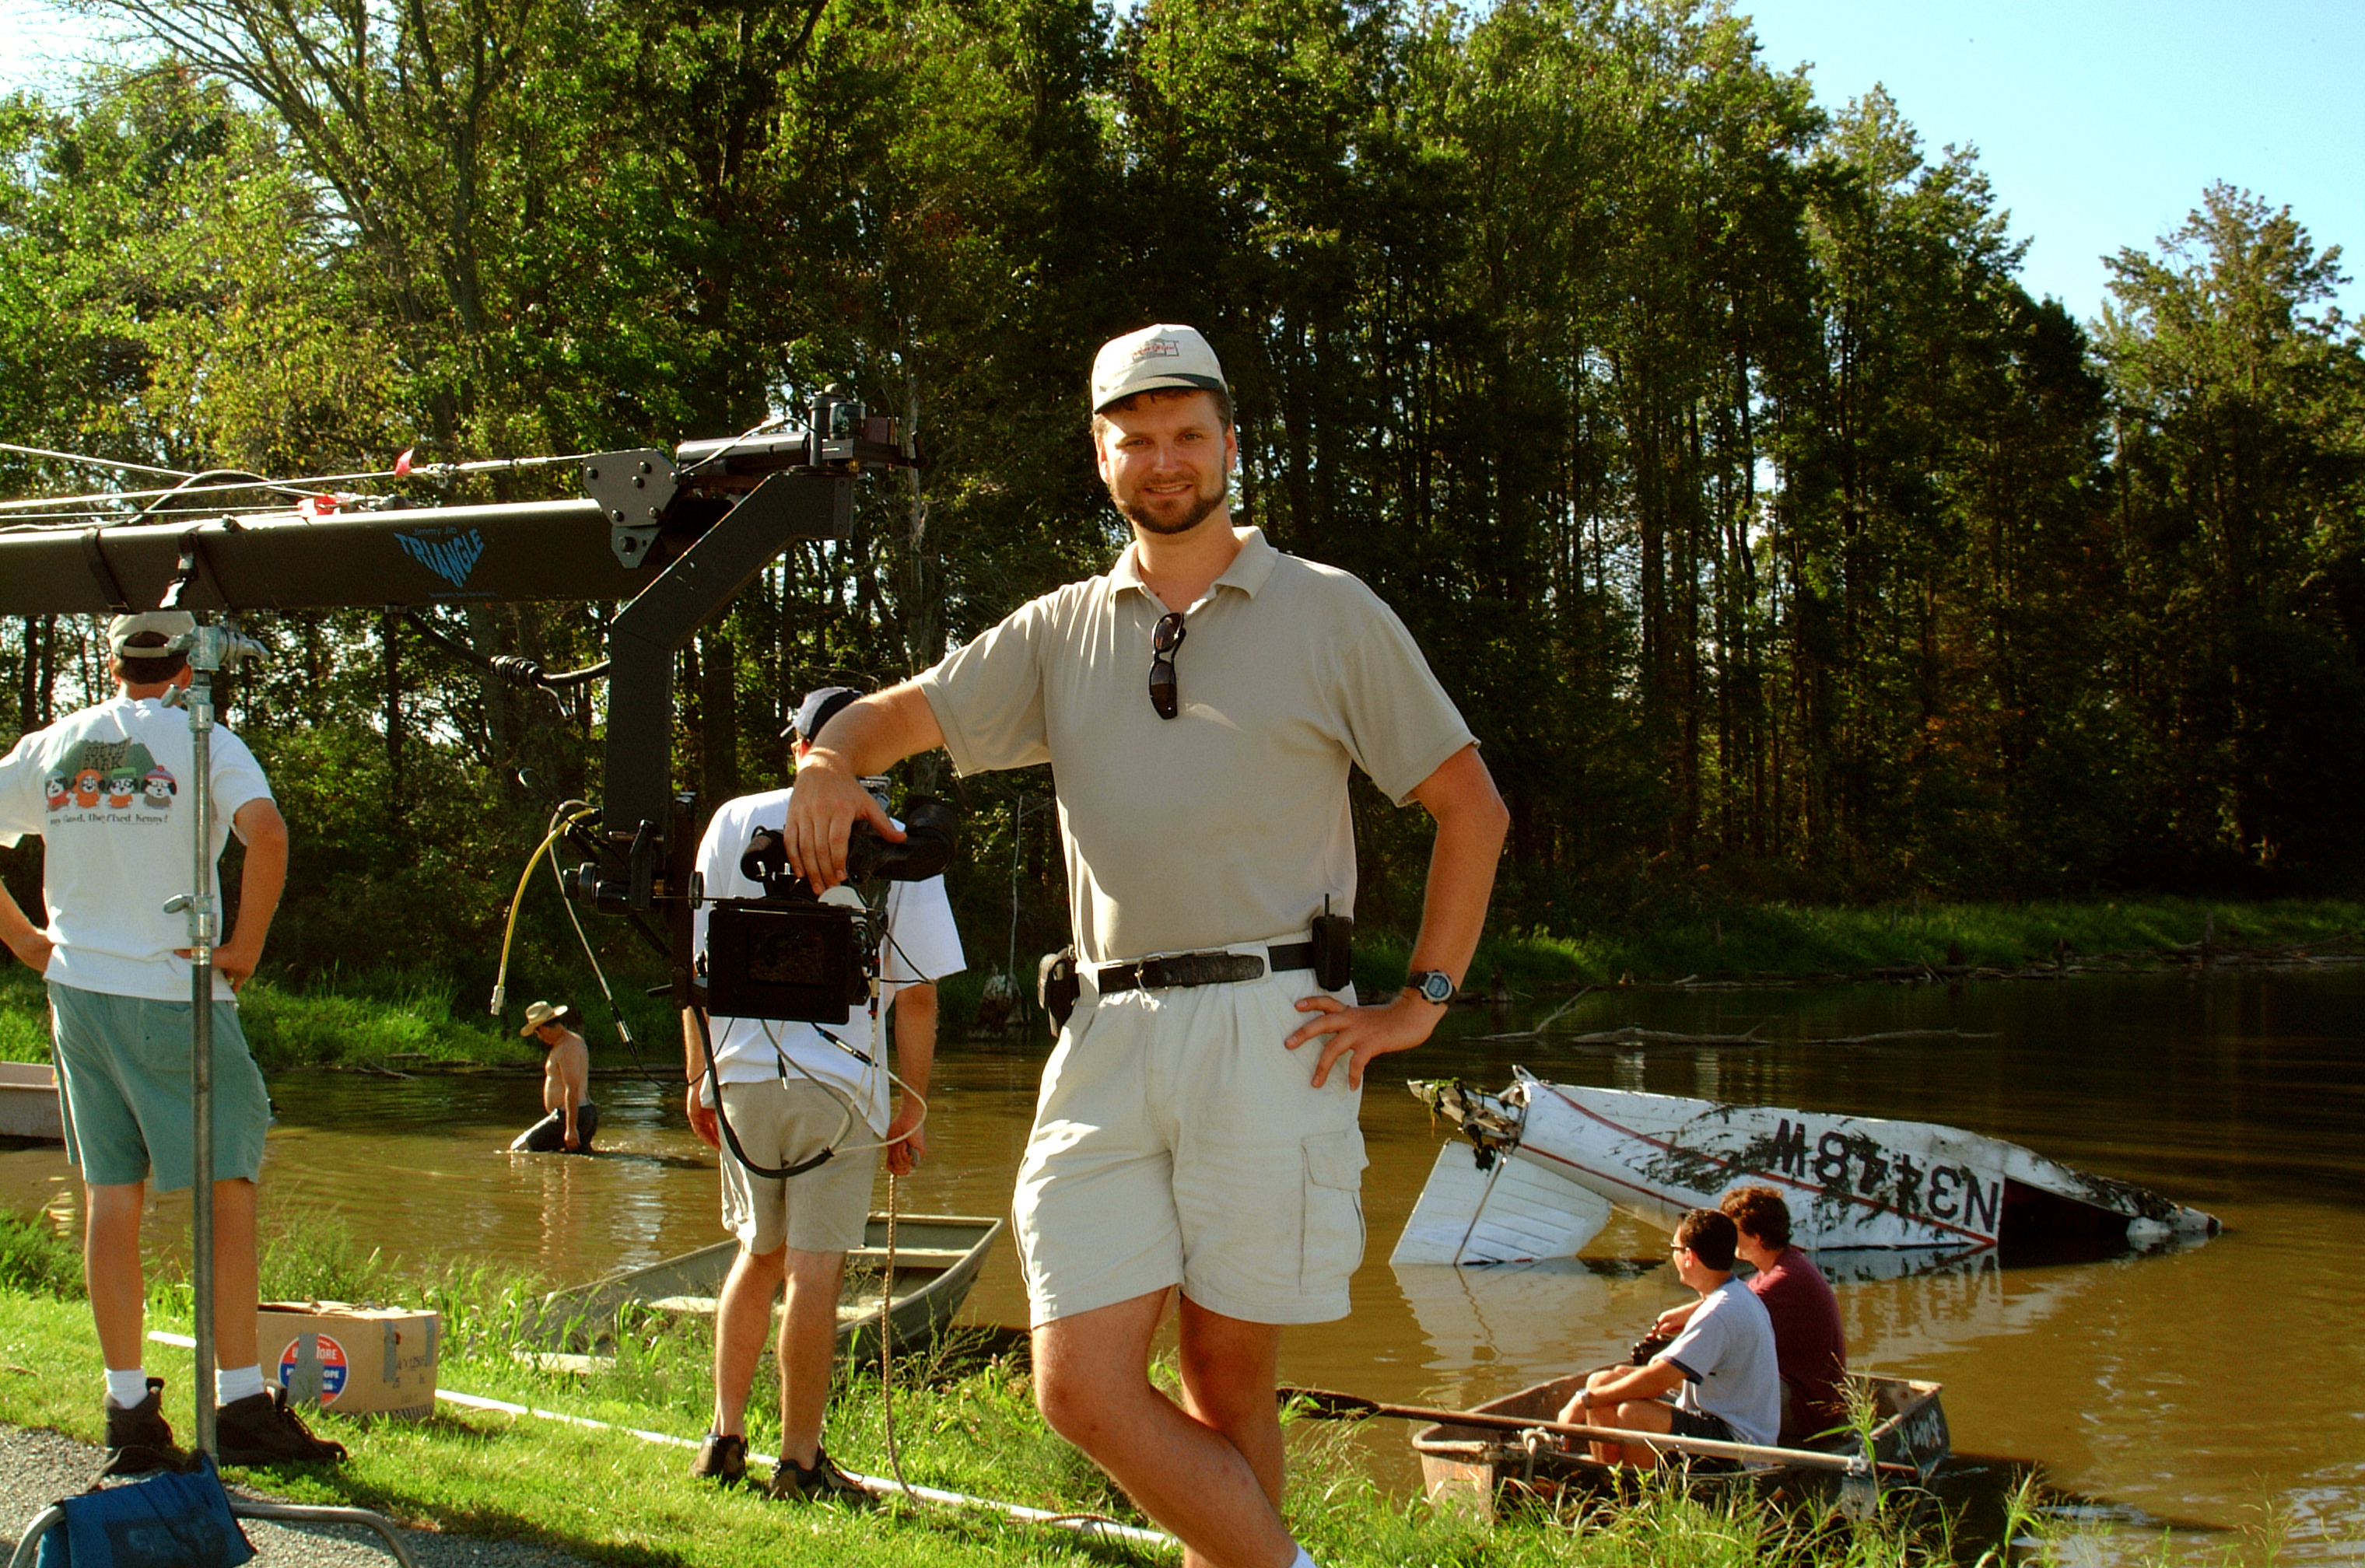 Lars was a Jib Operator for Vital Signs on Discovery. nothing like a plane crash in the water and a nice crane shot skimming the water.